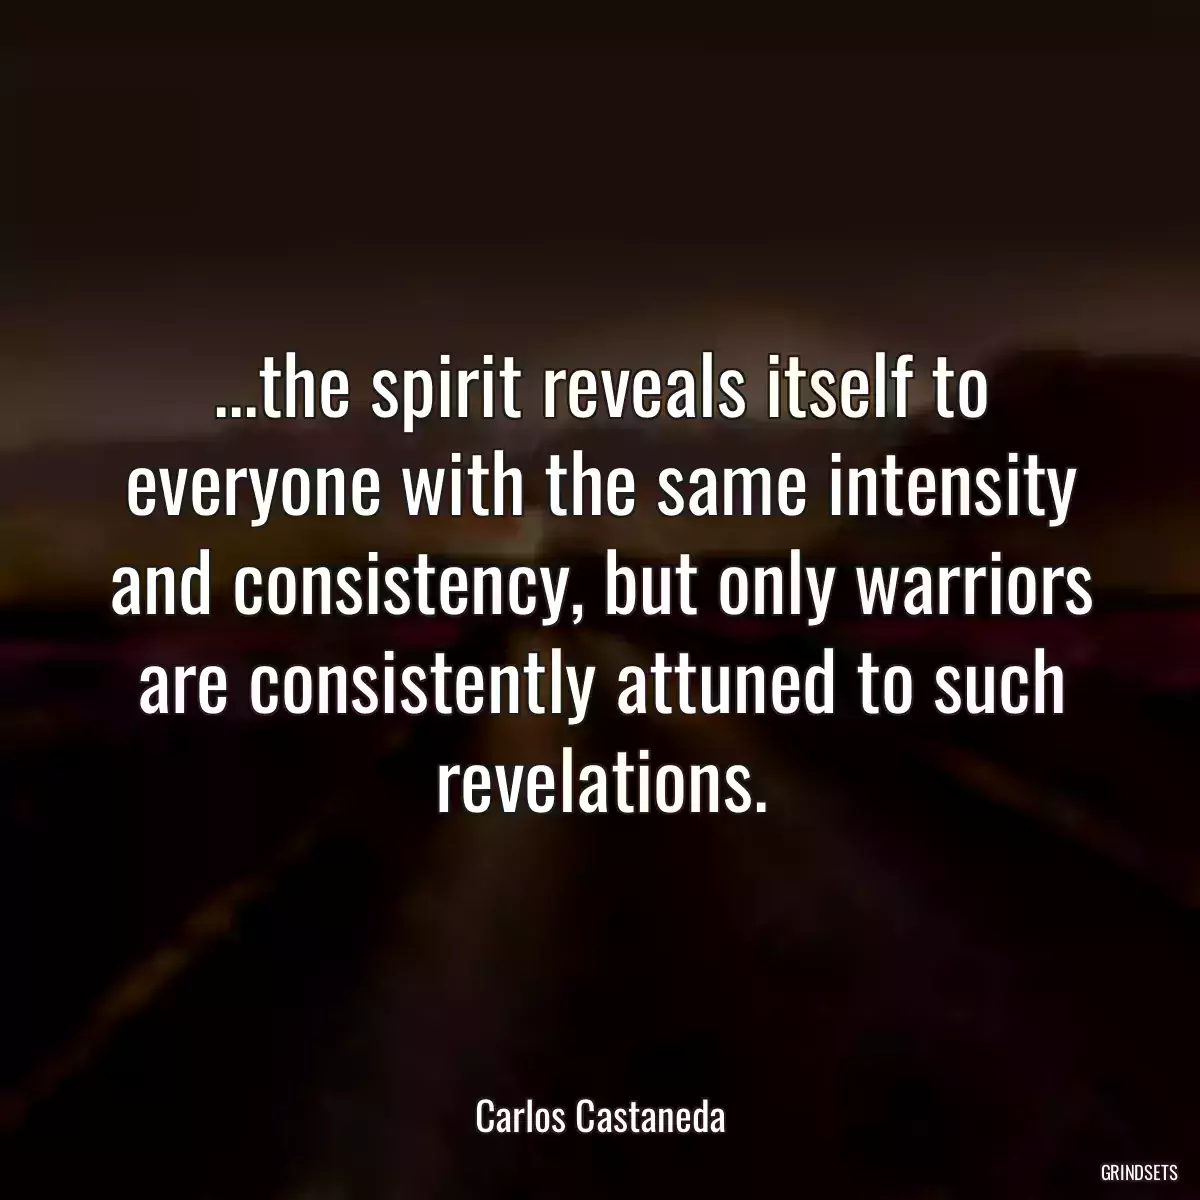 ...the spirit reveals itself to everyone with the same intensity and consistency, but only warriors are consistently attuned to such revelations.